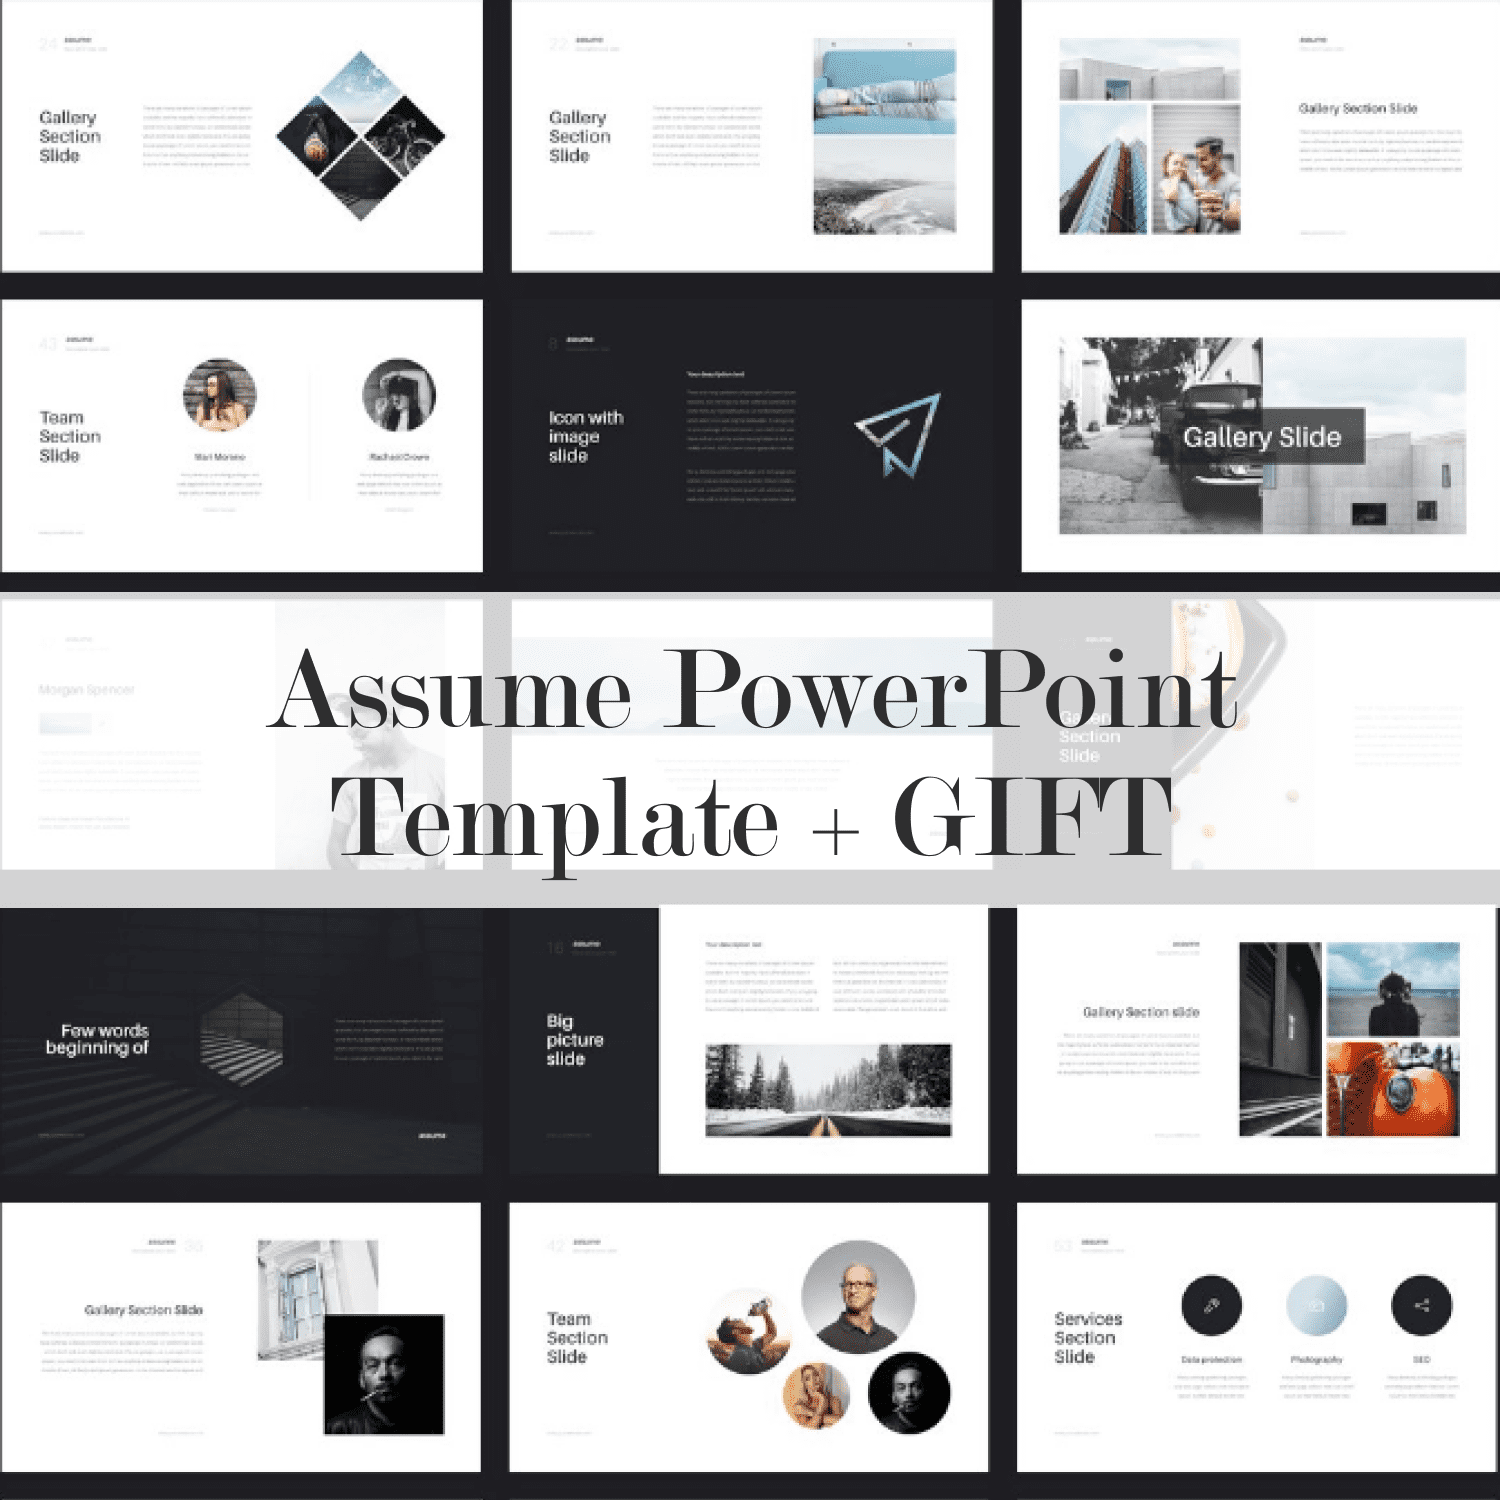 Assume PowerPoint Template + GIFT main cover.